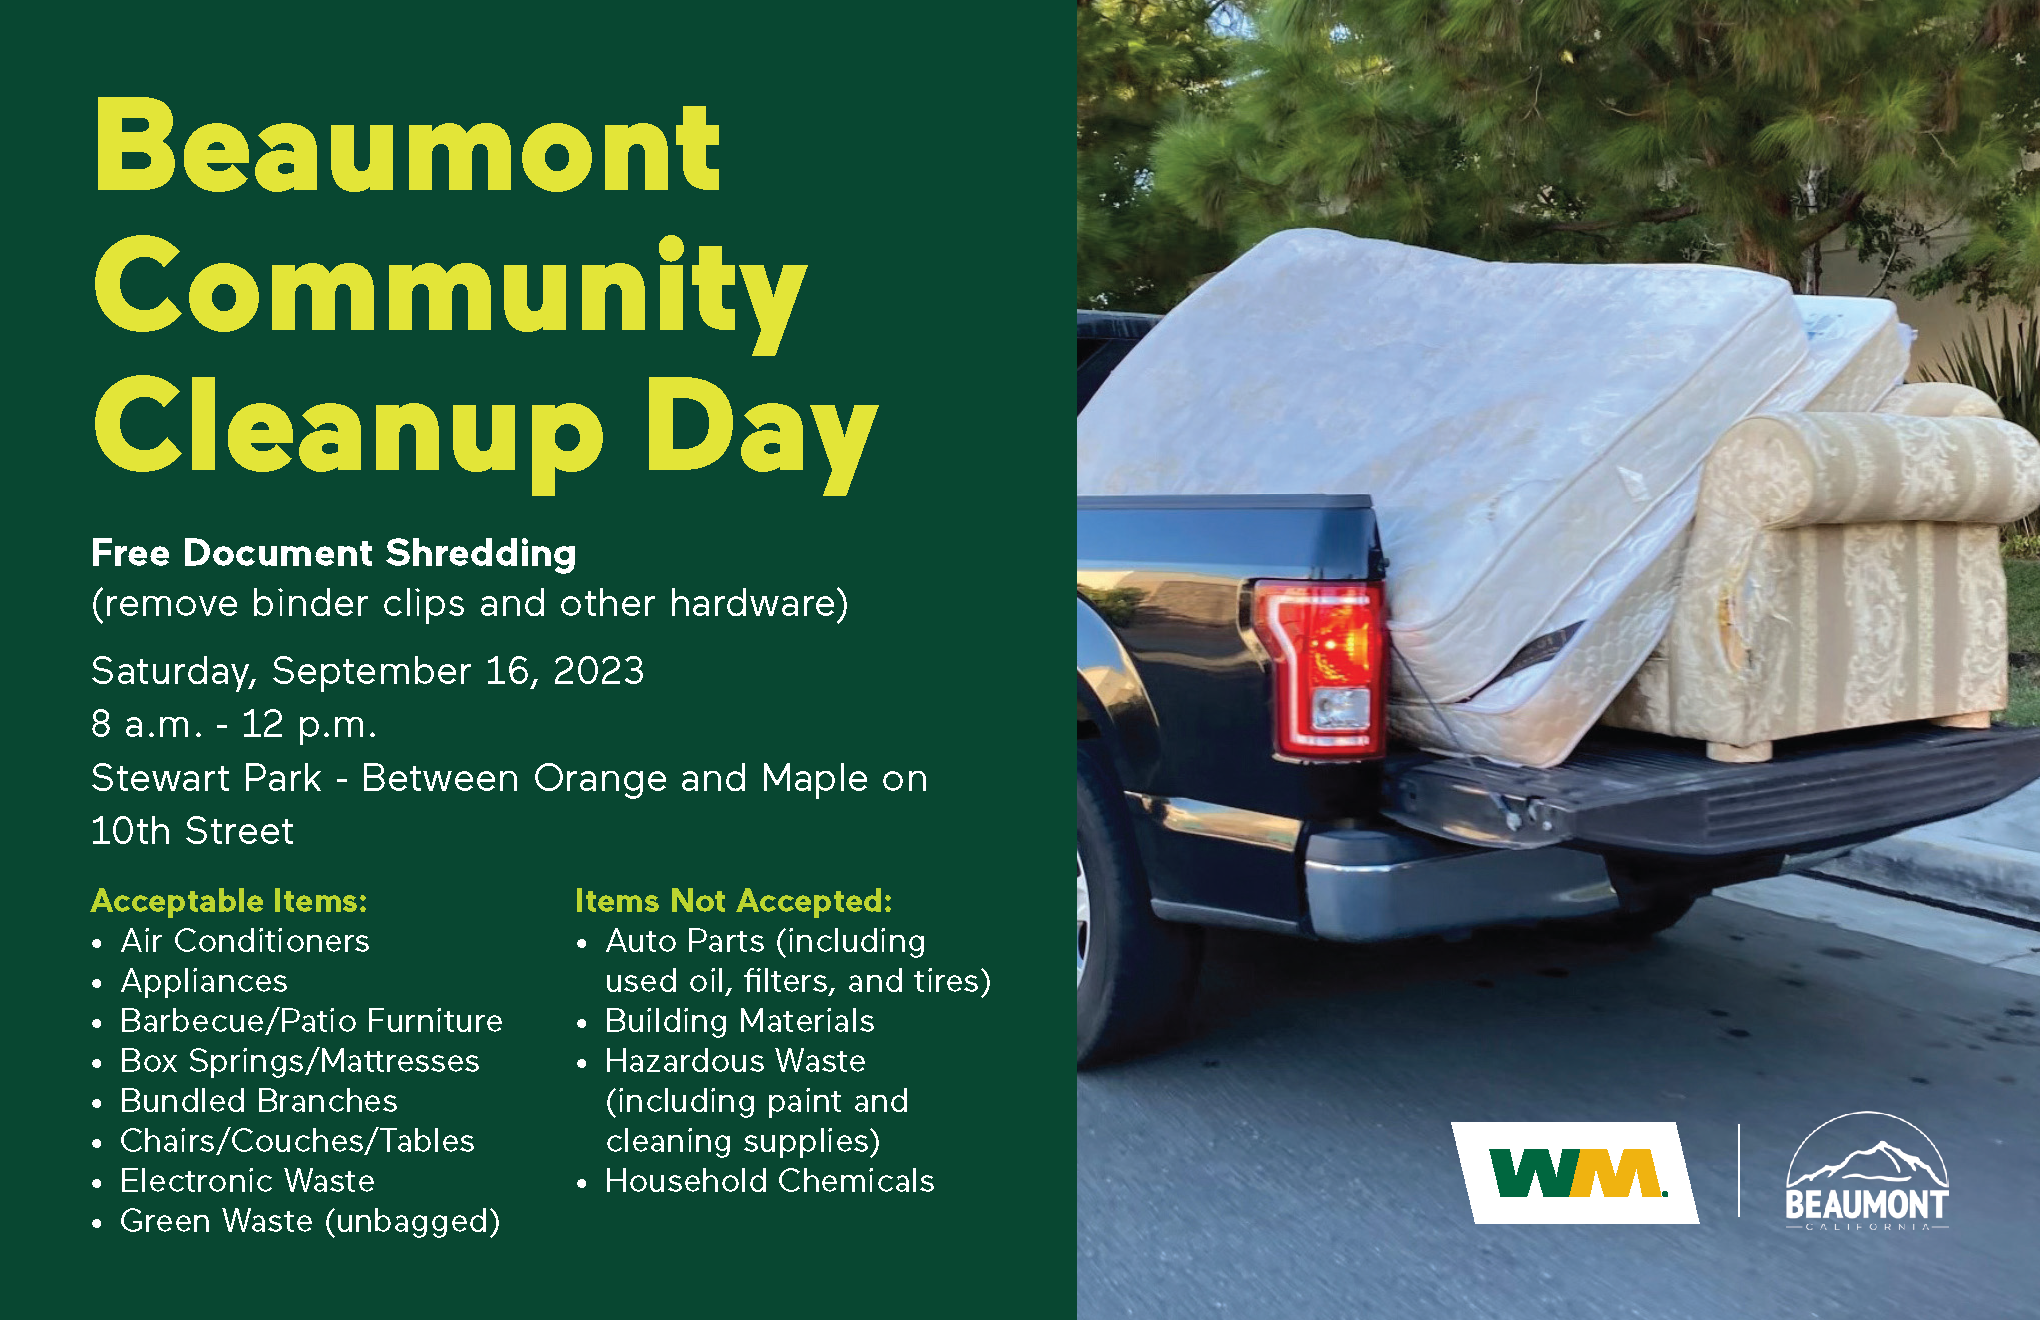 Beaumont Community Cleanup Day @ Stewart Park | Beaumont | California | United States